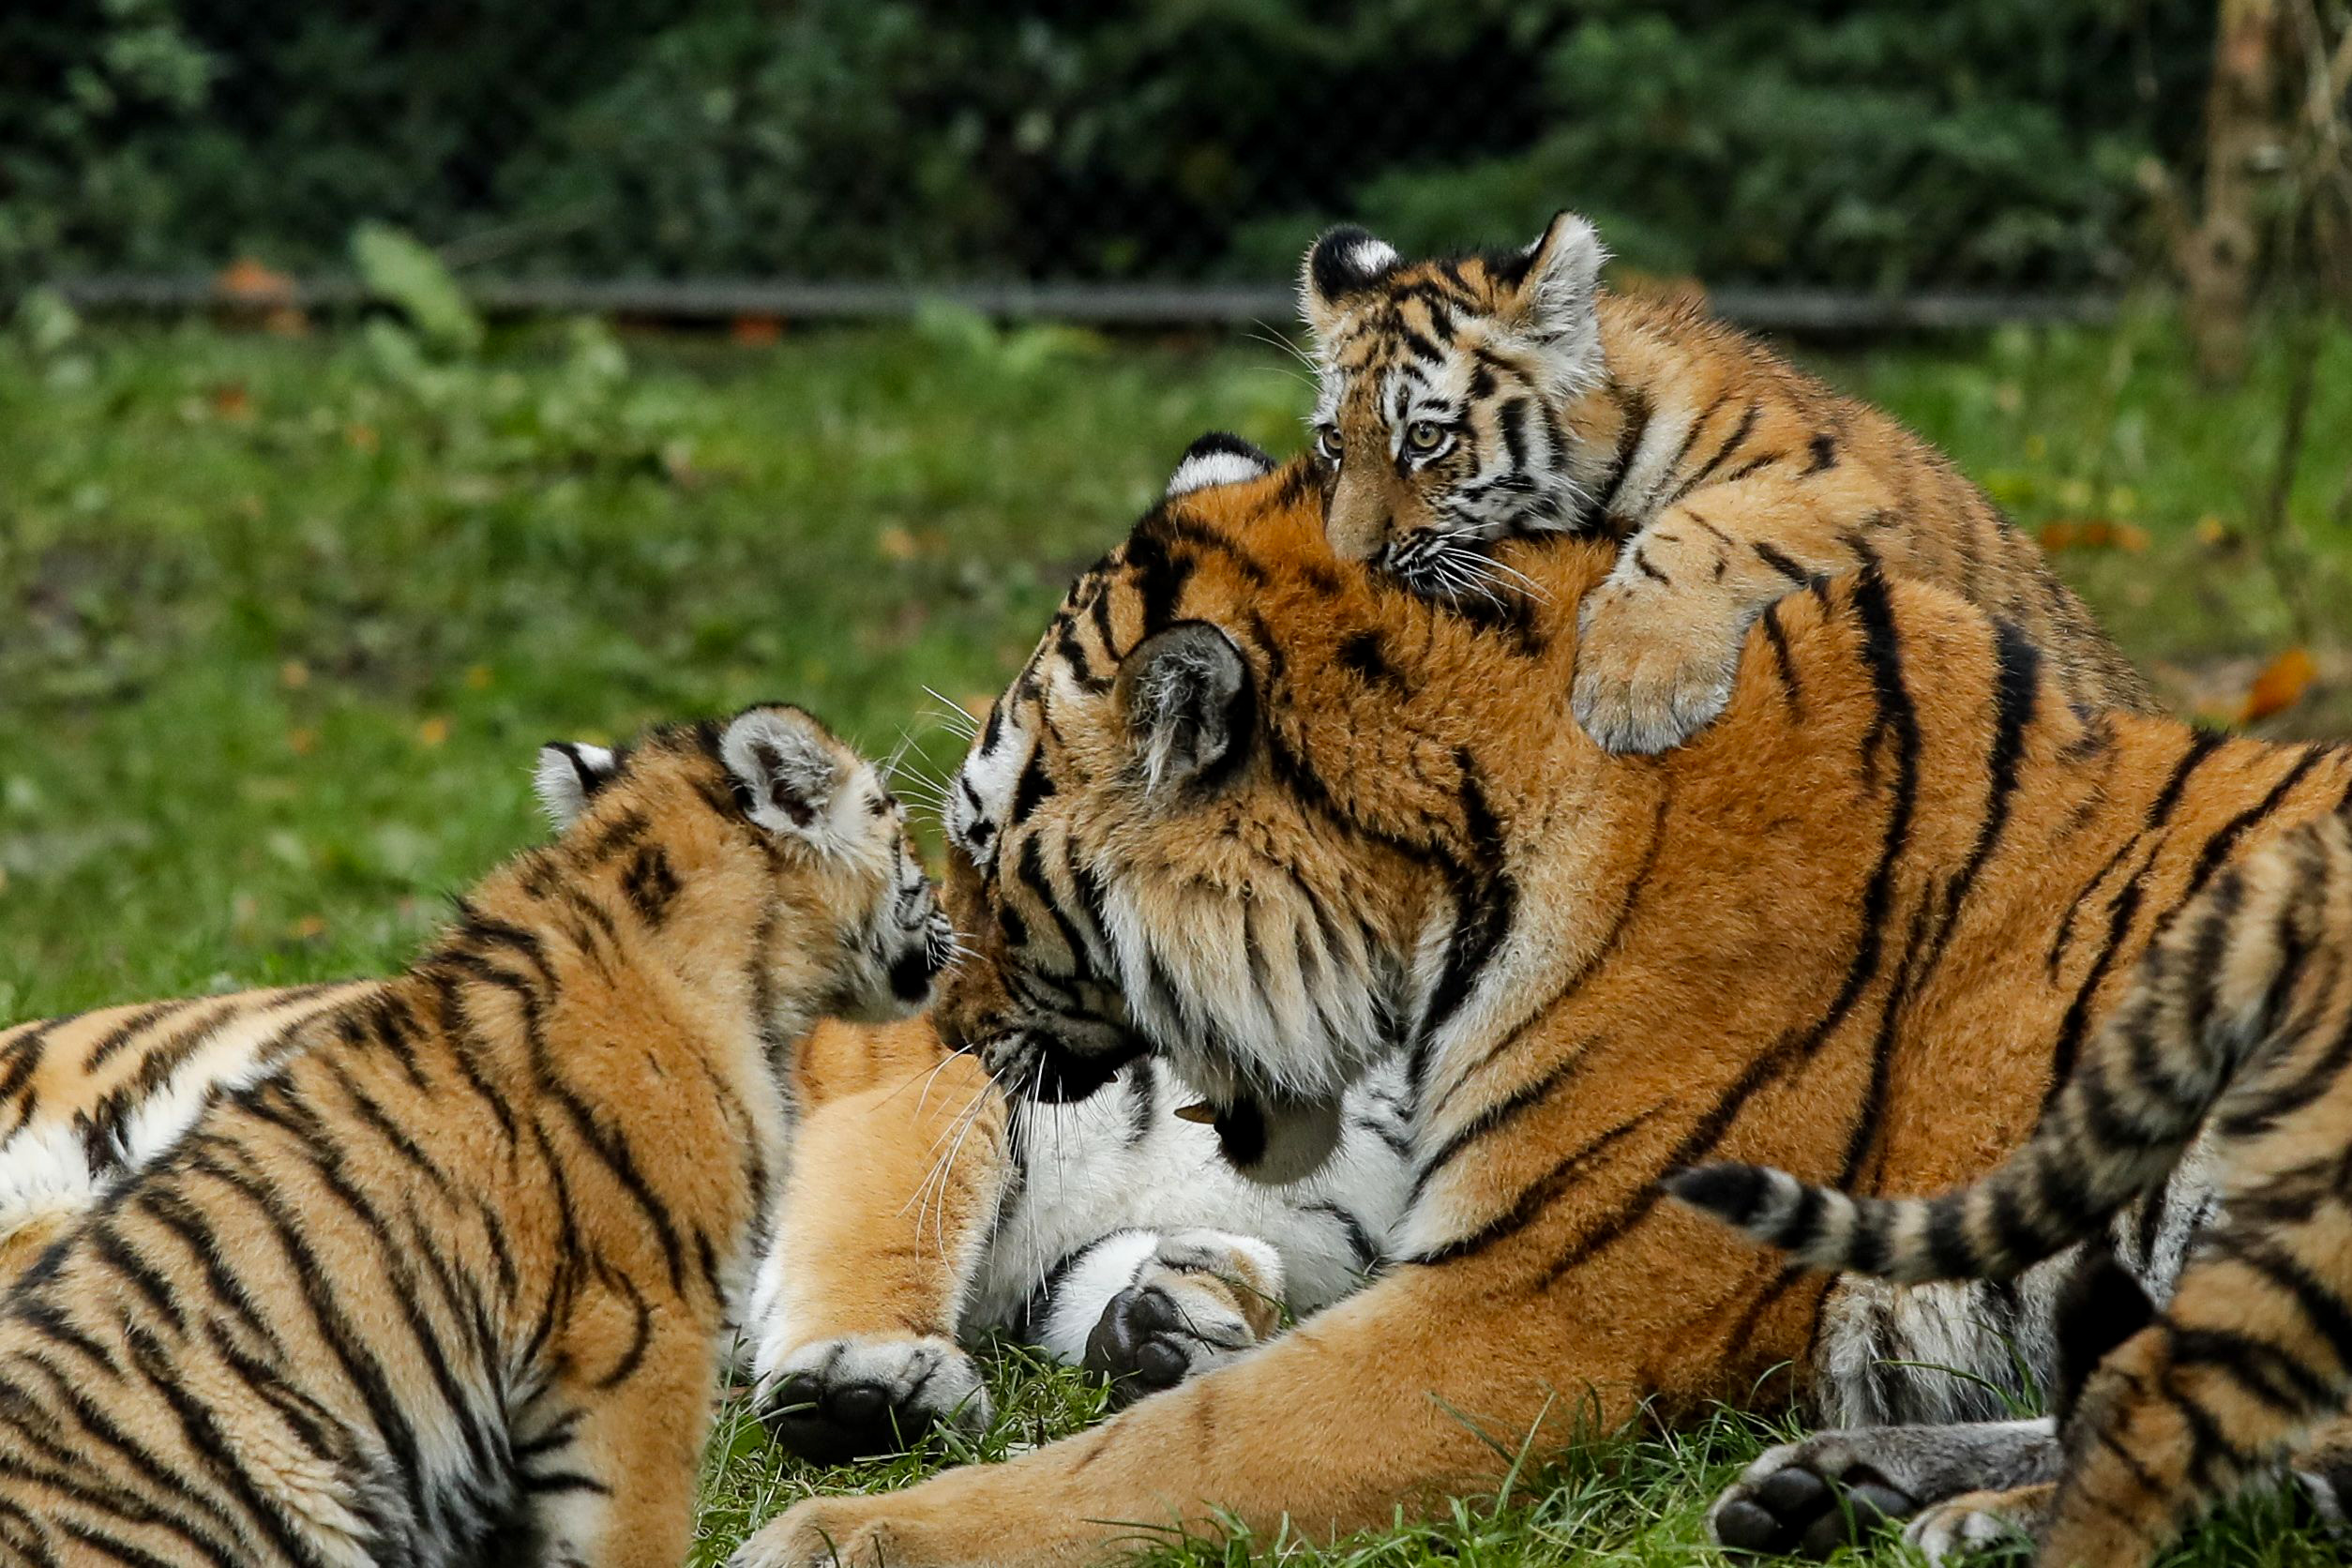 PHOTO: Tiger cubs jump on their father at the Hagenbeck Zoo in Hamburg, Germany, Oct. 26, 2017.